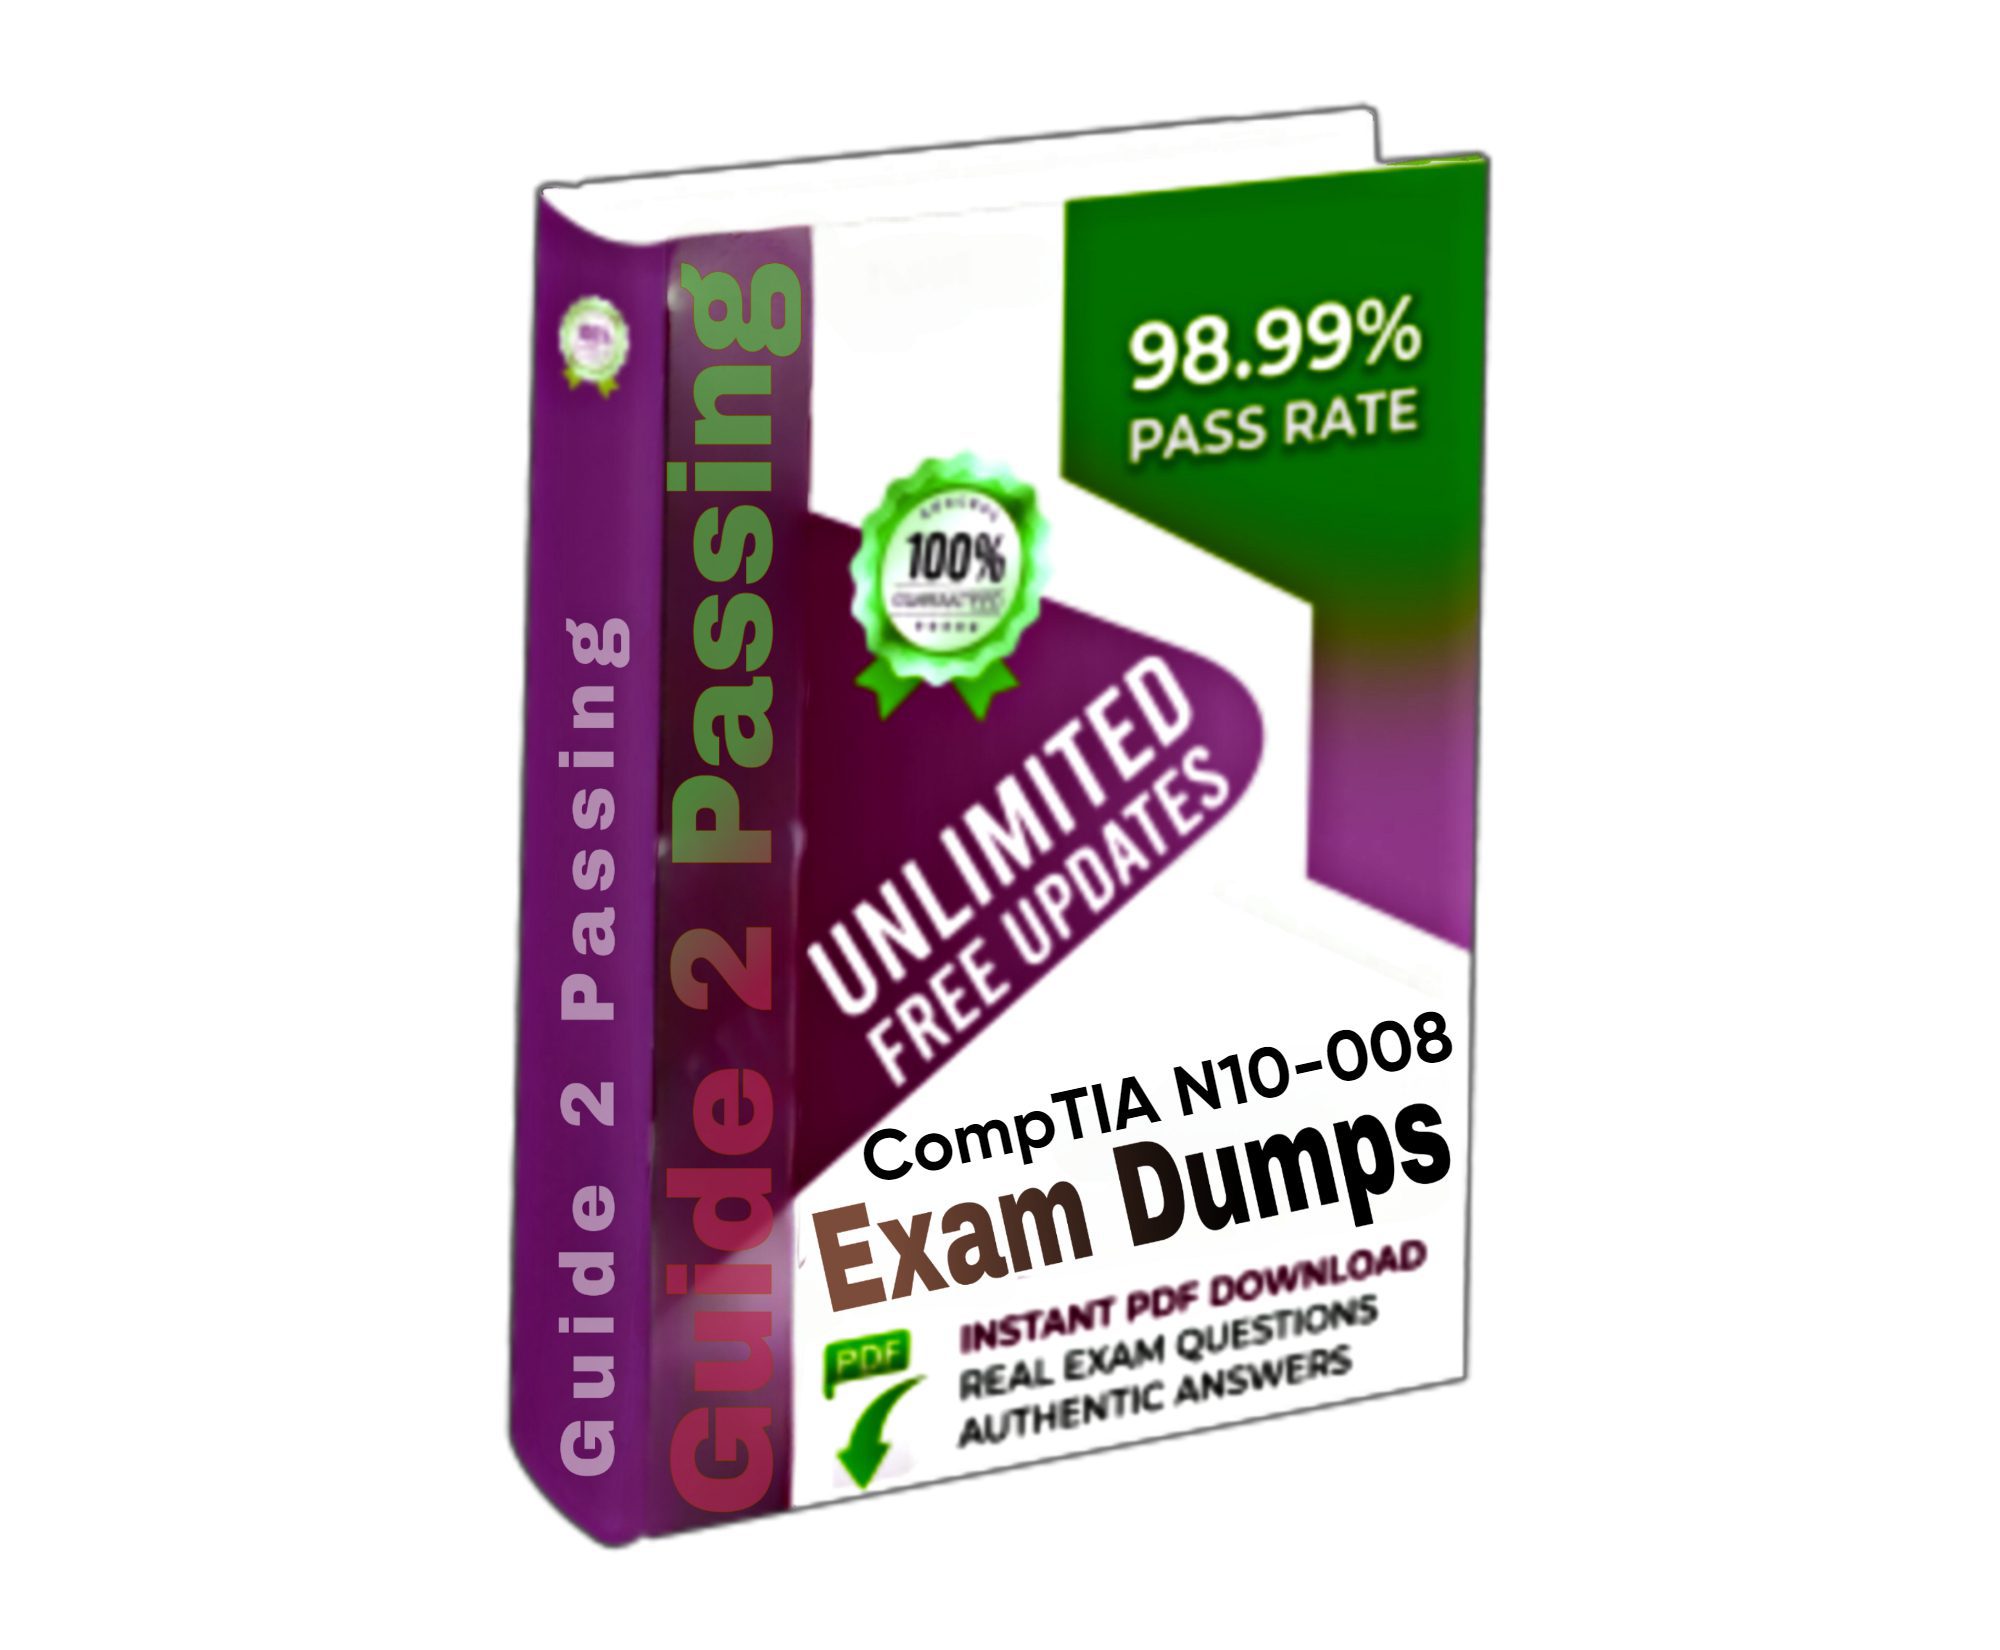 Pass Your CompTIA N10-008 Exam Dumps From Guide 2 Passing